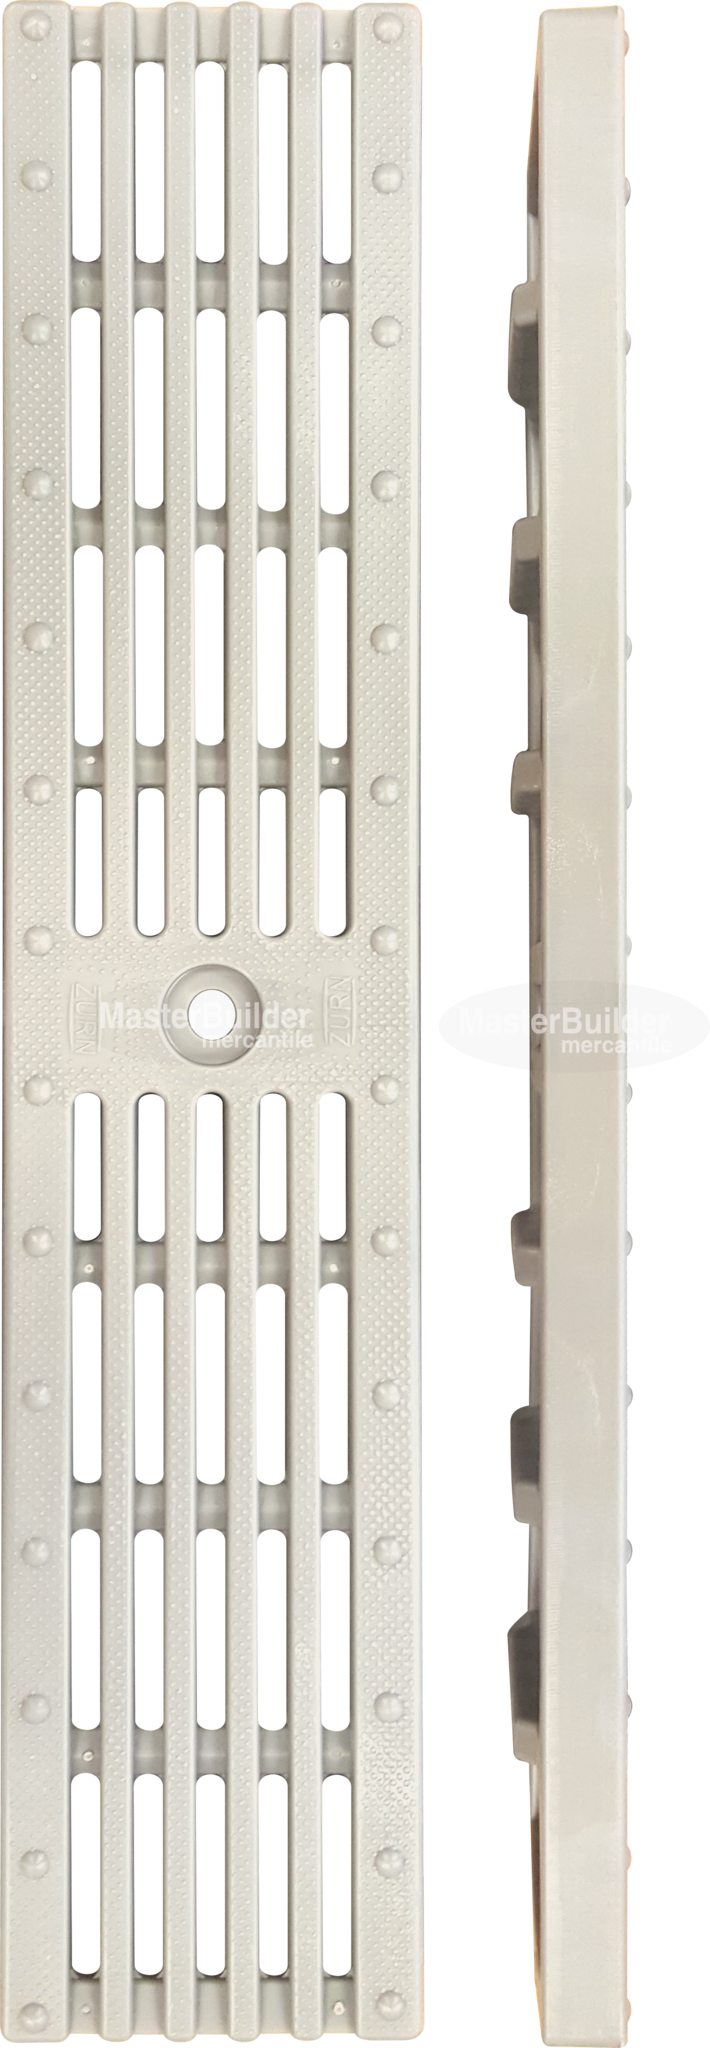 Zurn P4-HPP-WHITE 4-1/8" Wide Heel-Proof Slotted Grate White